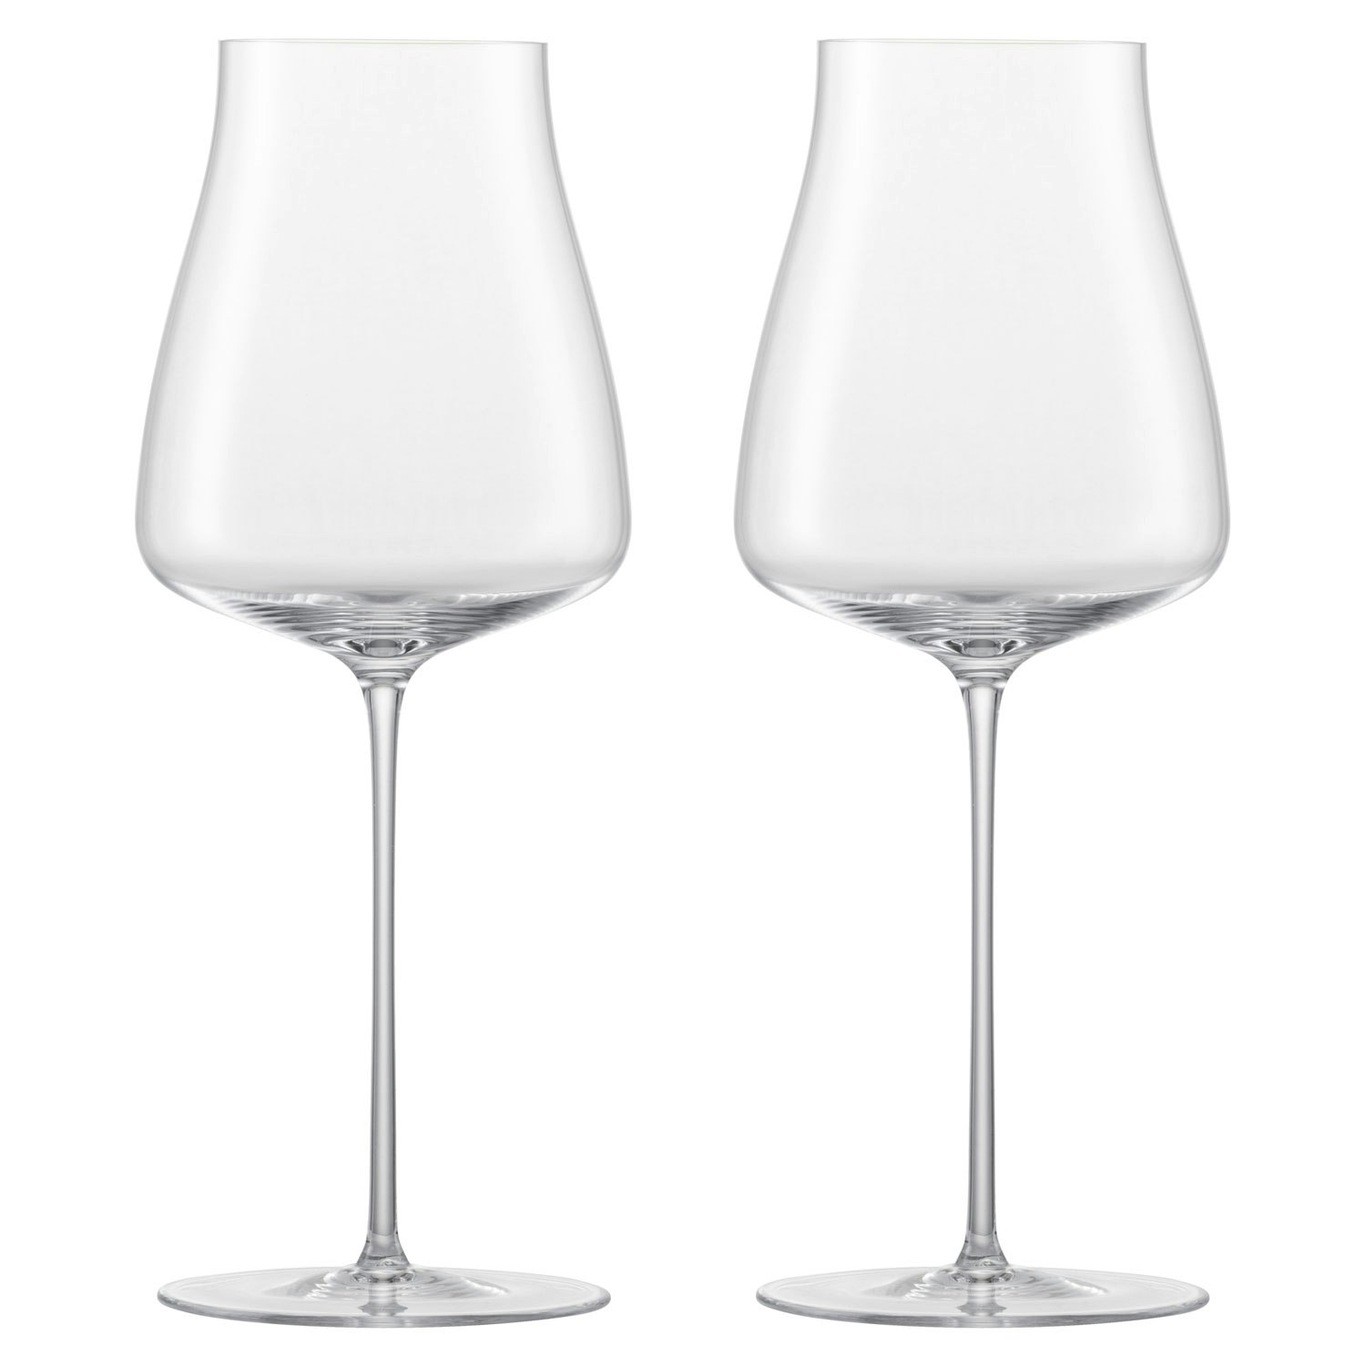 The Moment Riesling White Wine Glass 46 cl, 2-pack